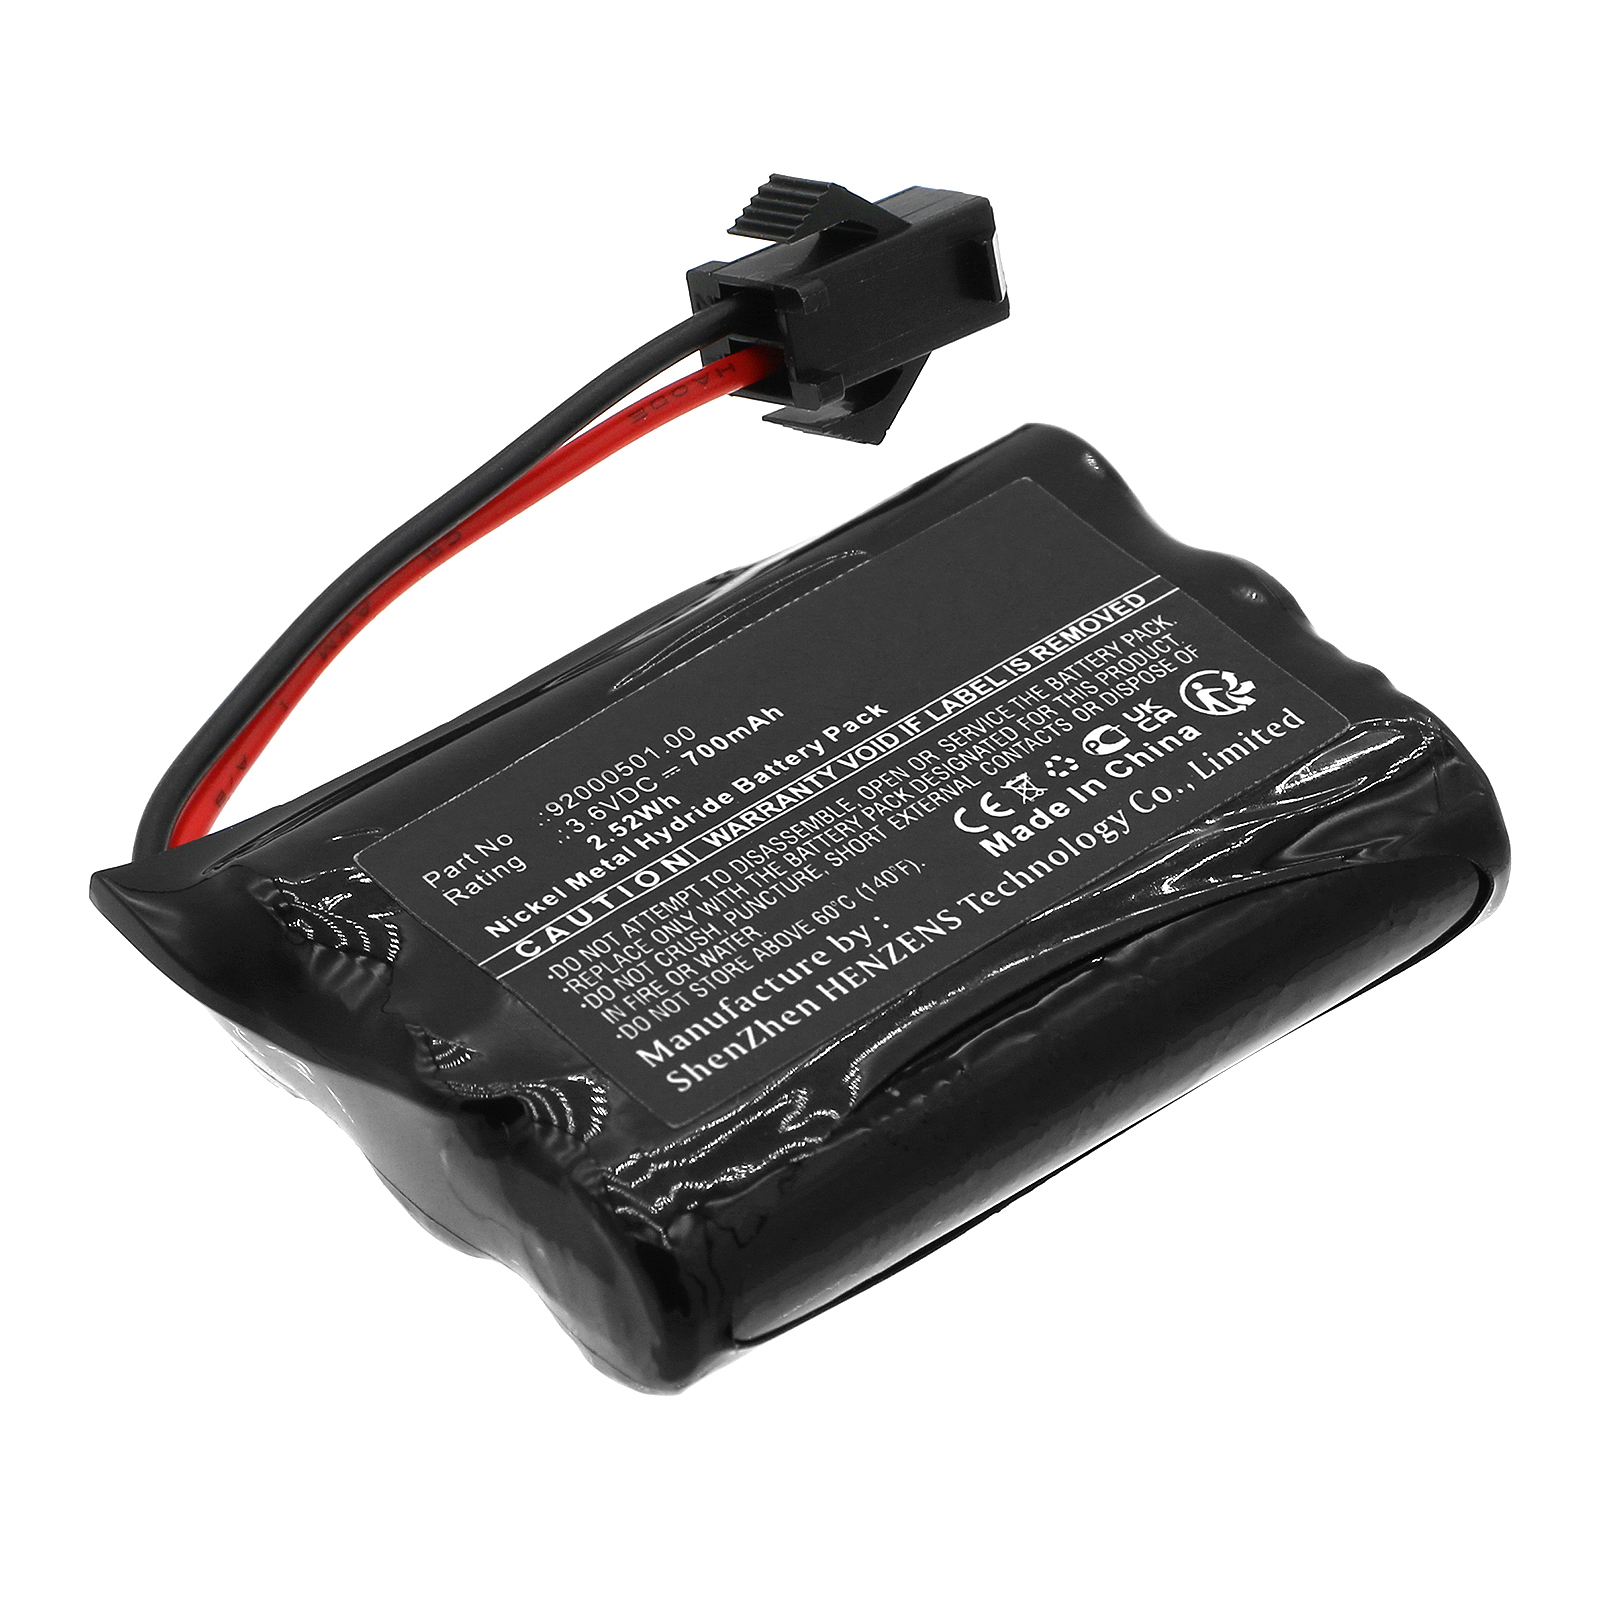 Synergy Digital Solar Battery, Compatible with Esotec 92000501.00 Solar Battery (Ni-MH, 3.6V, 700mAh)